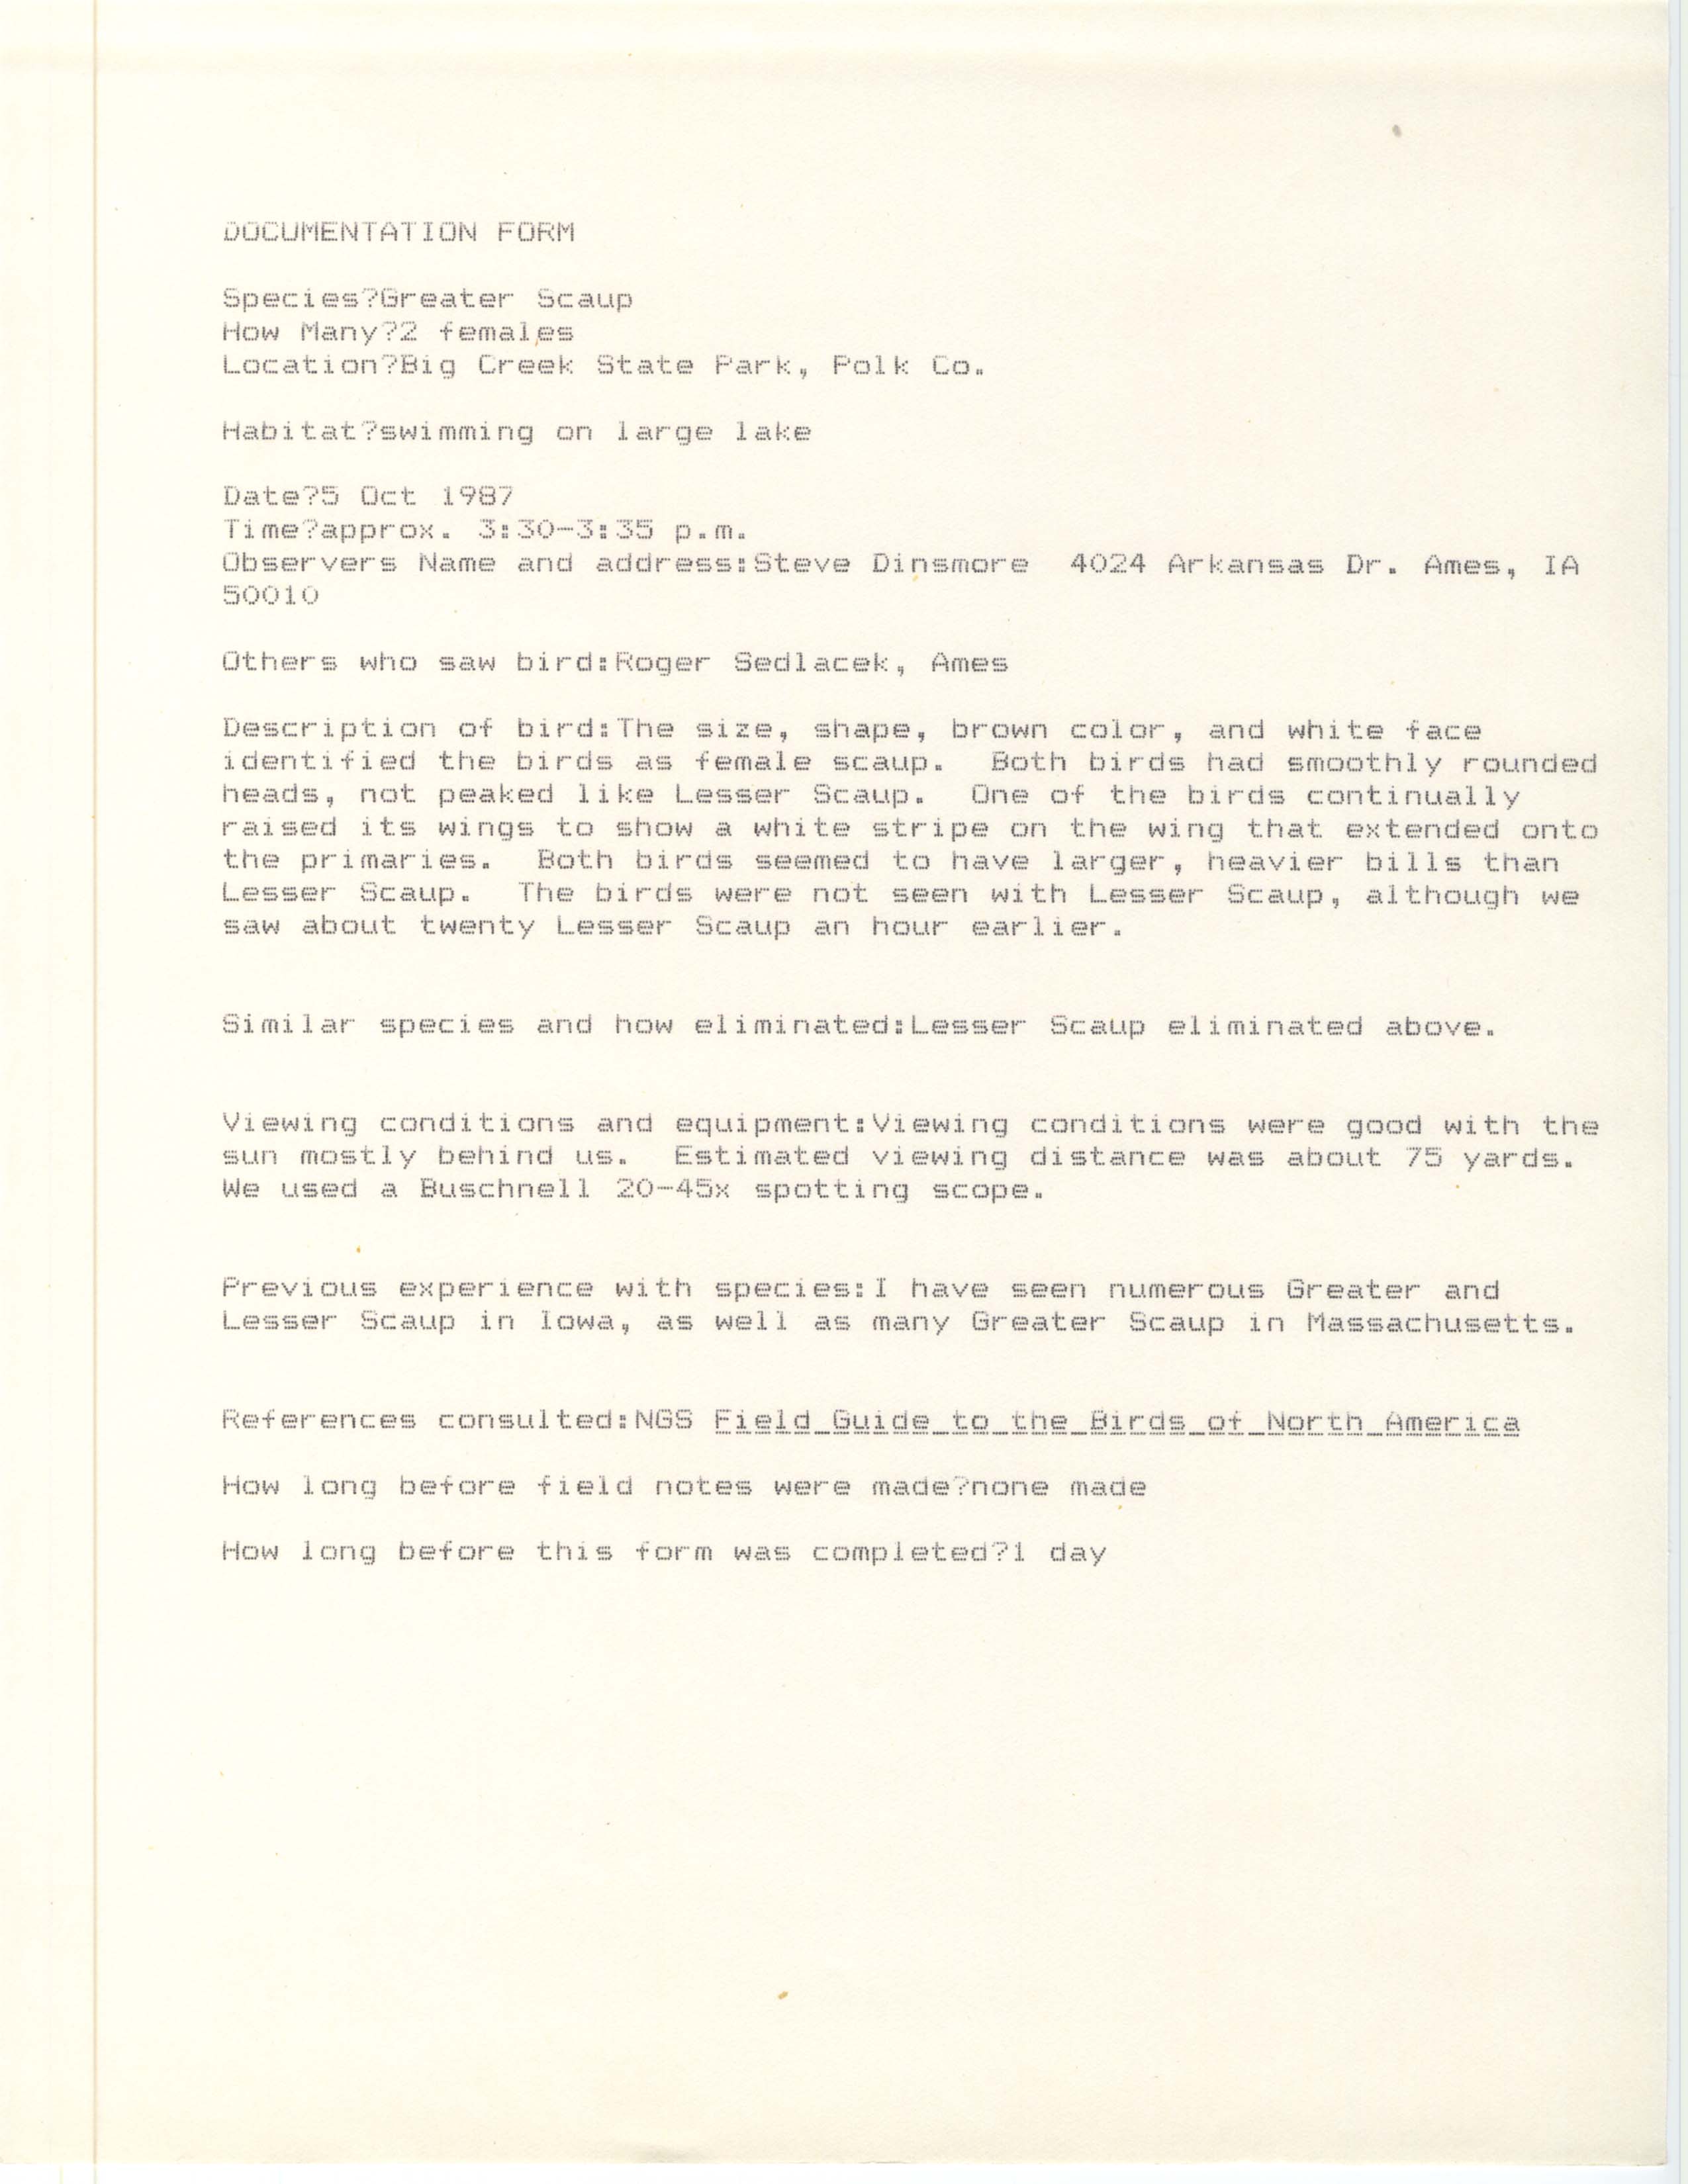 Rare bird documentation form for Greater Scaup at Big Creek State Park, 1987